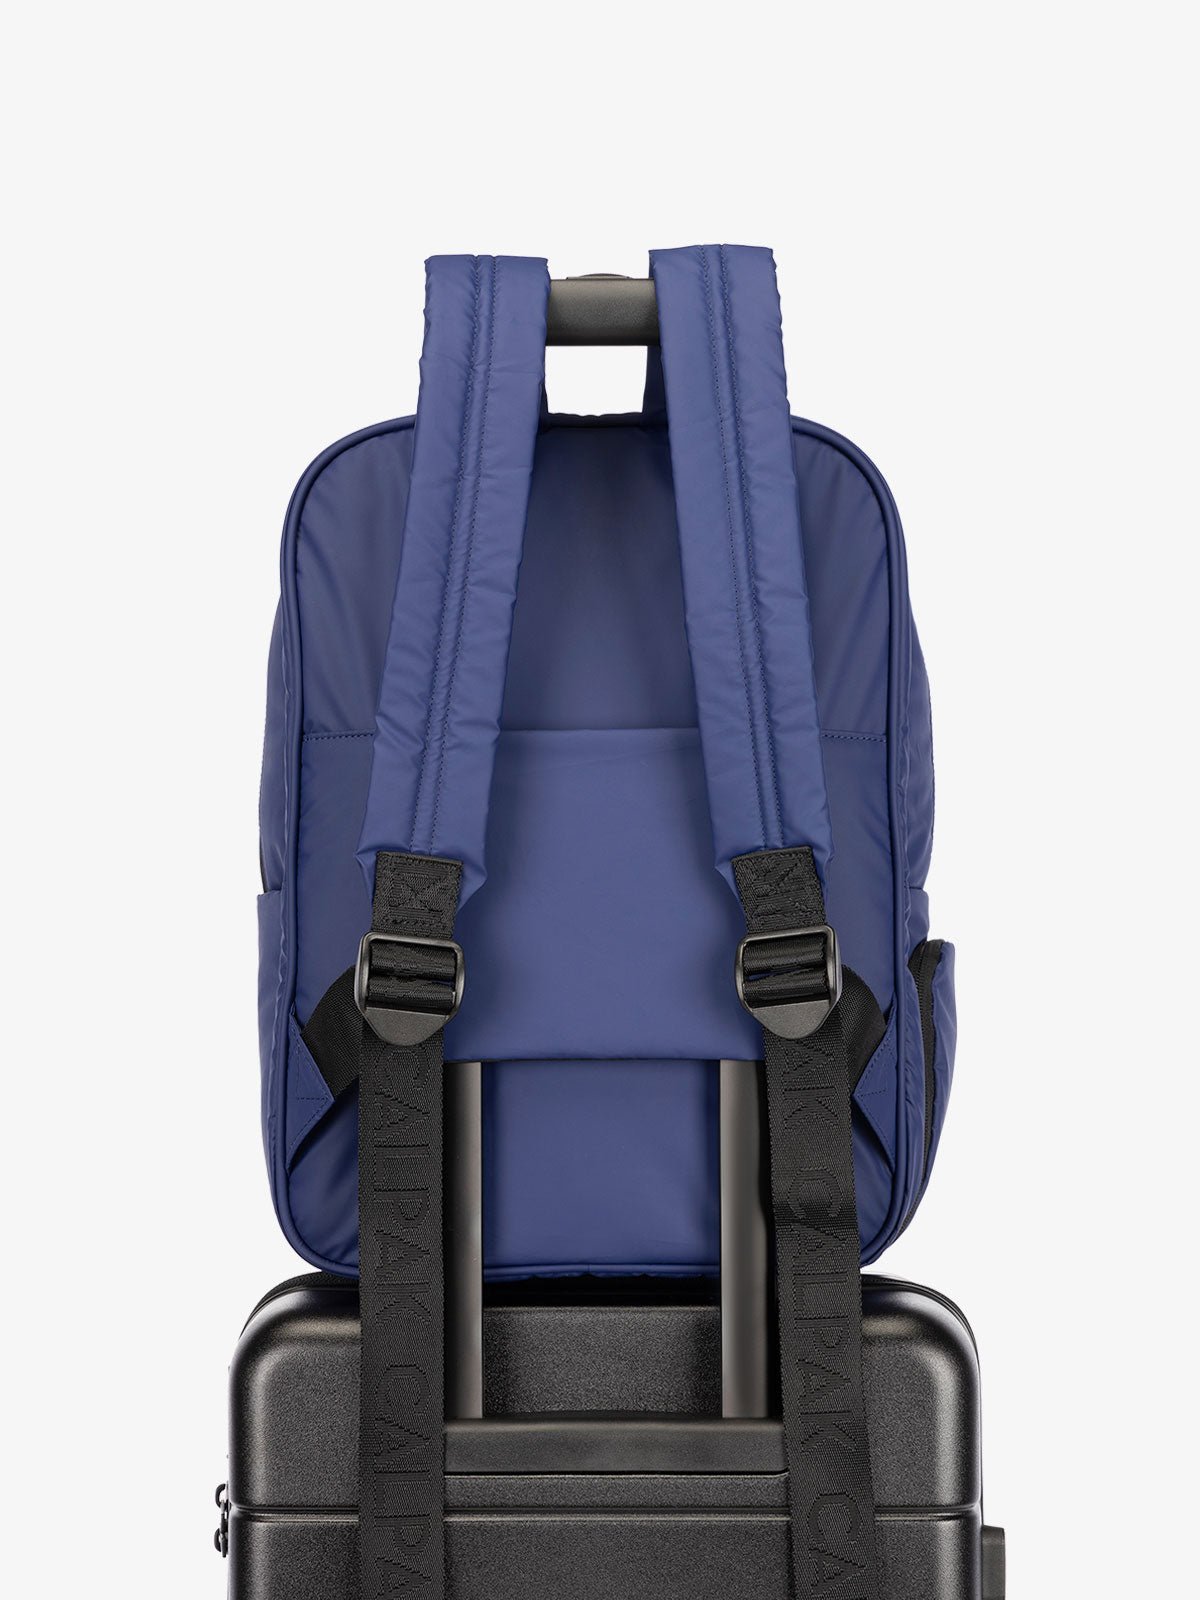 CALPAK water resistant Luka Laptop Backpack with adjustable shoulder straps and trolley sleeve in navy blue